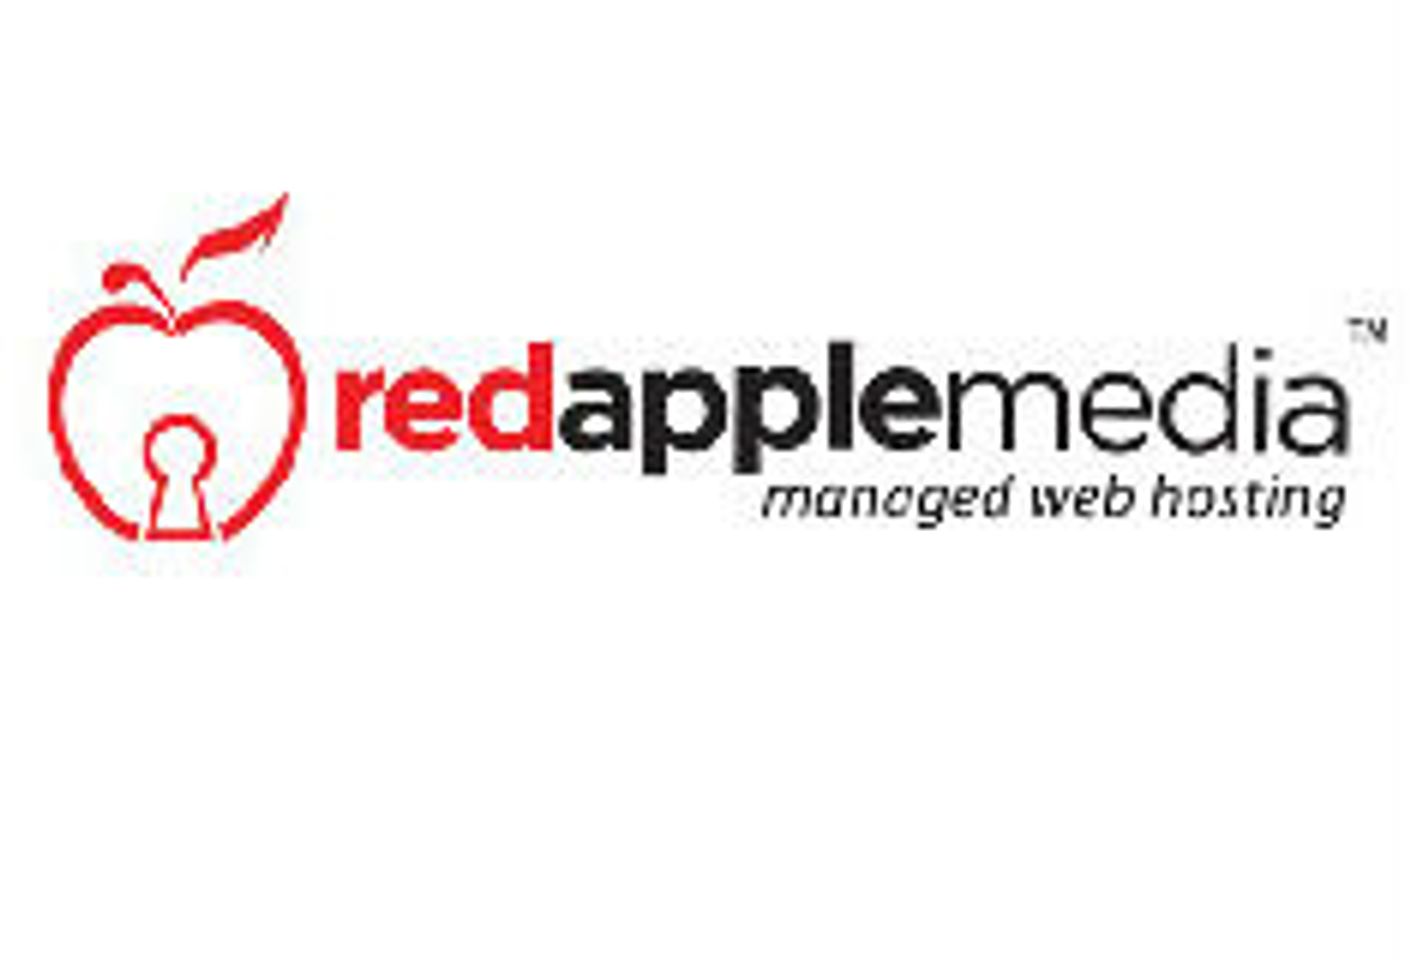 Red Apple Media Launches Qualified Hosting Promotion w/ Free iPad mini Giveaway